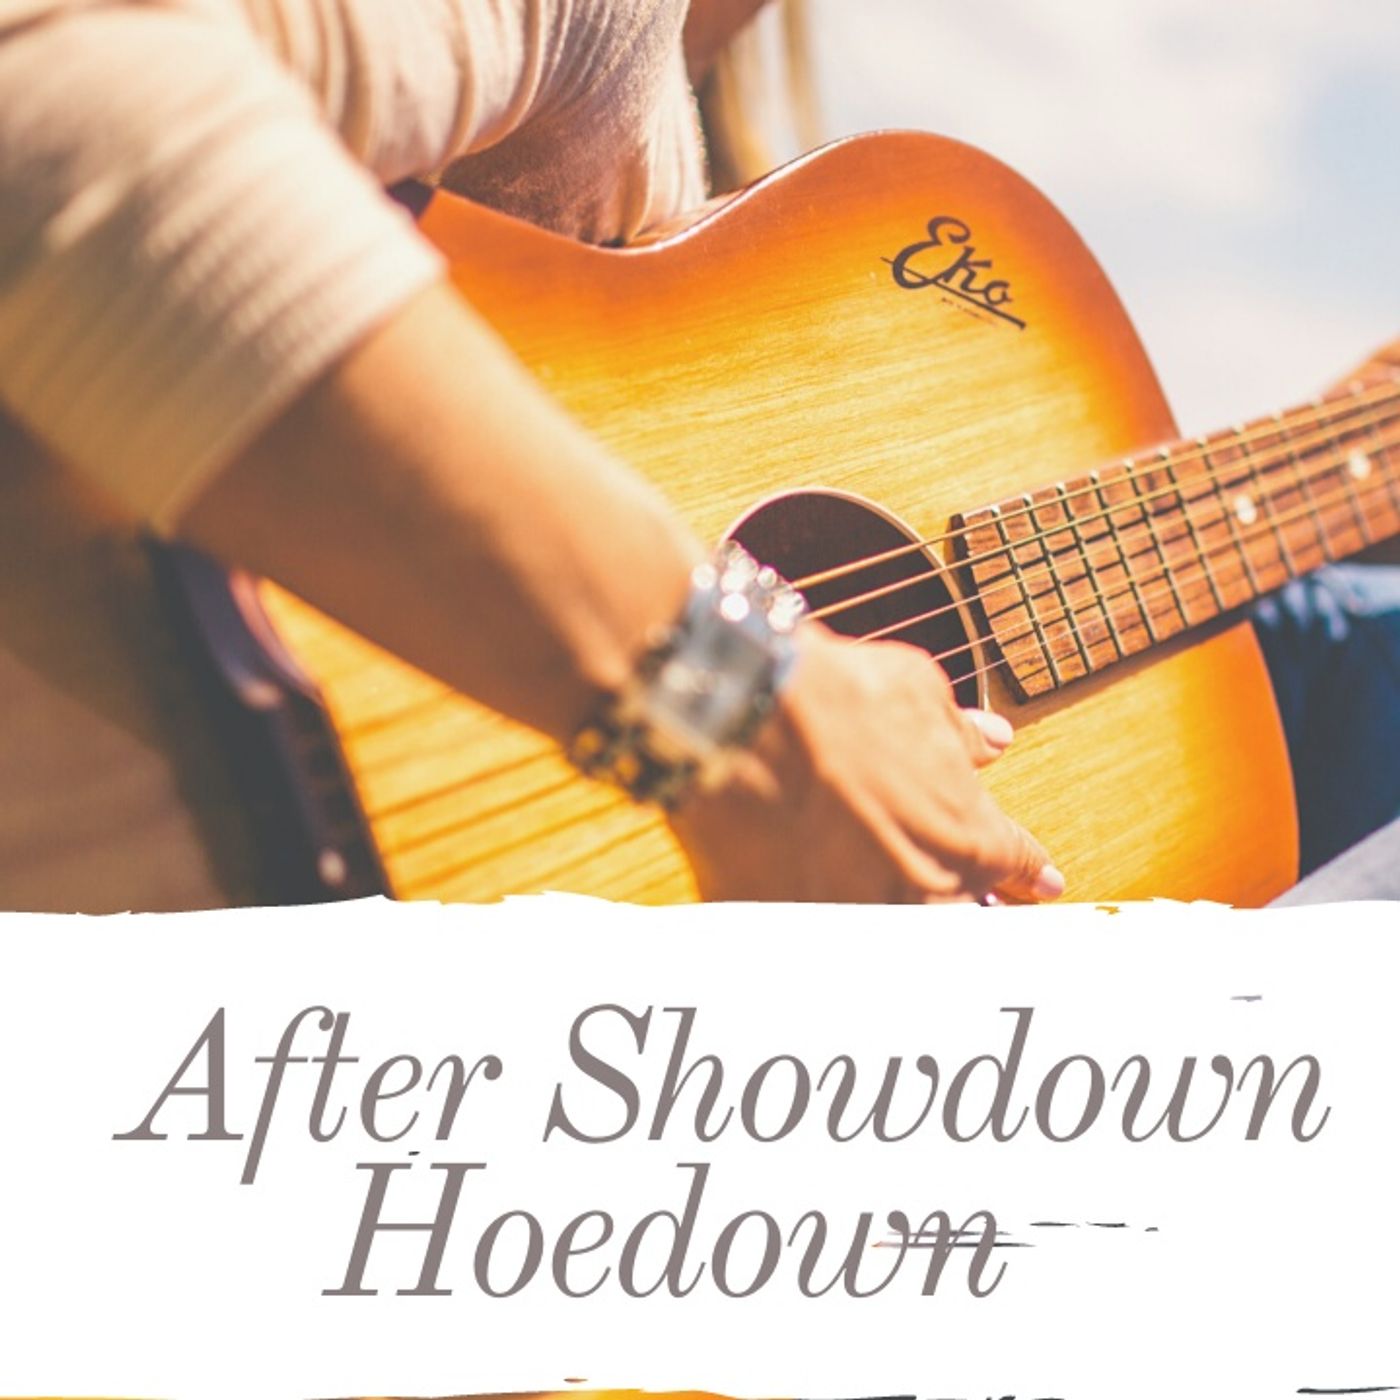 The After Showdown Hoedown